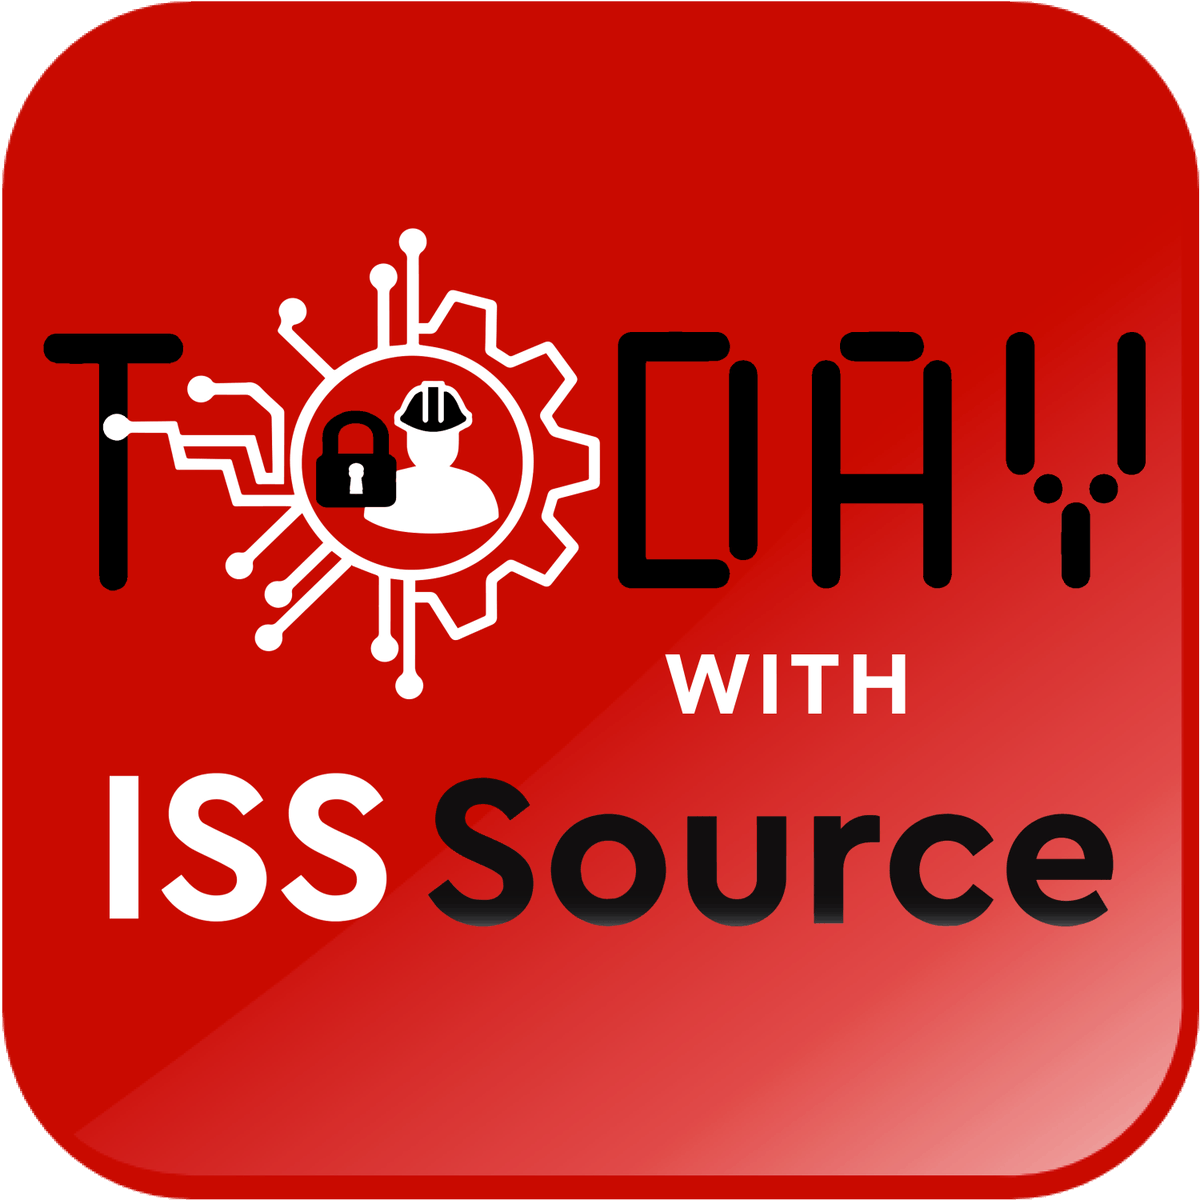 Security: Attackers learn from infiltrating a system where they may know it better than the victim. With the right technology and people, it is possible to stop an attack before it starts: Podcast. #ICS #industrialcybersecurity #scadasecurity
bit.ly/43NWflD